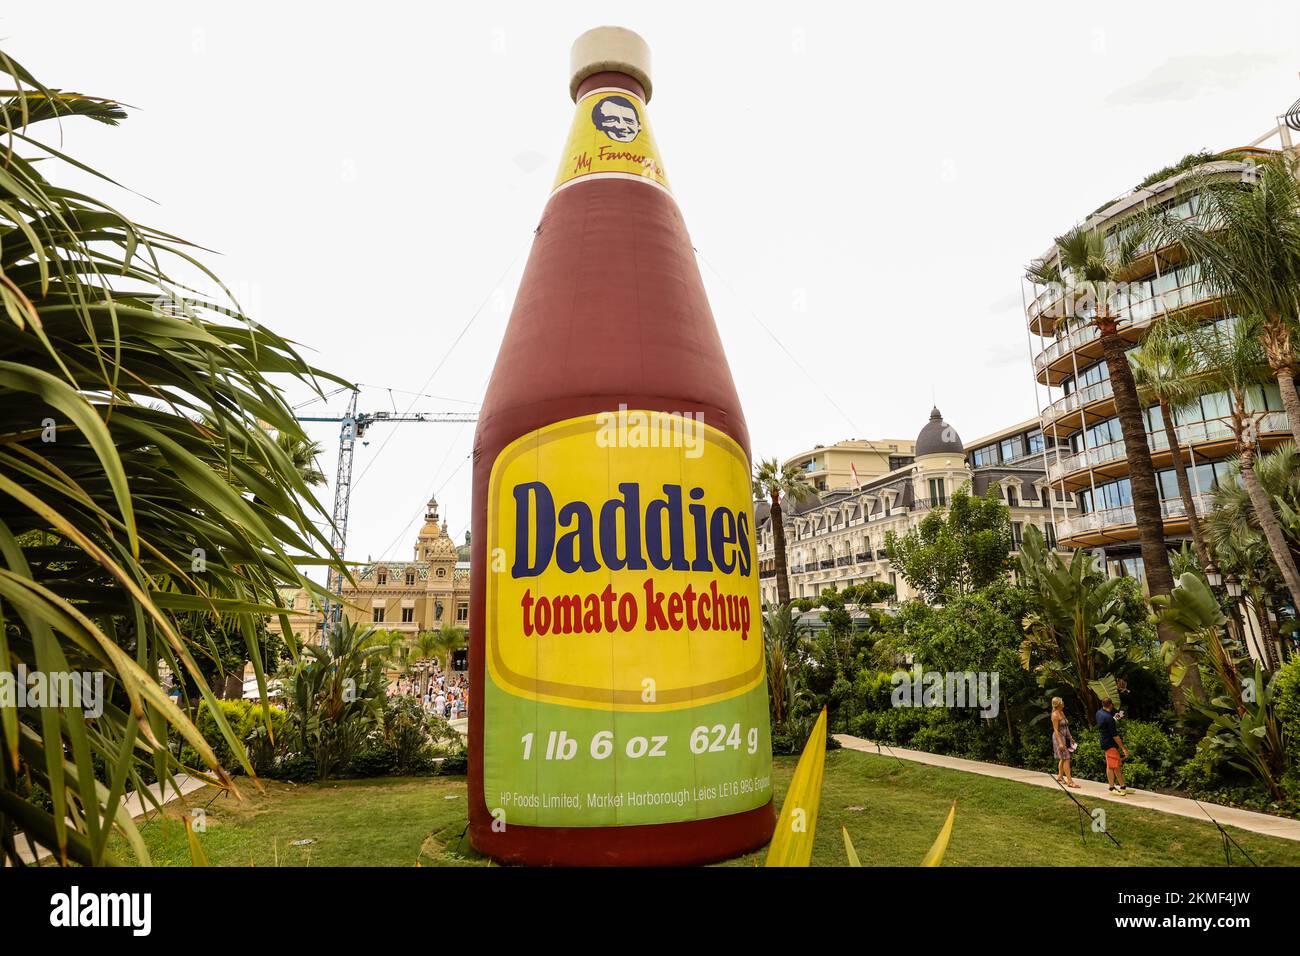 A huge bottle of Daddies tomato ketchup in the Casino Gardens,a work of, art,Daddies Tomato Ketchup Inflatable,sculpture,by, artist, Paul McCarthy. It is part of a bigger exhibition that features many of the artist’s works in a retrospective of his art in the heart of the Principality, Monte Carlo,Monaco,South of France,France,French,Europe,European,August,summer.Mediterranean,coast,city,state,country,rich,millionaires, Stock Photo